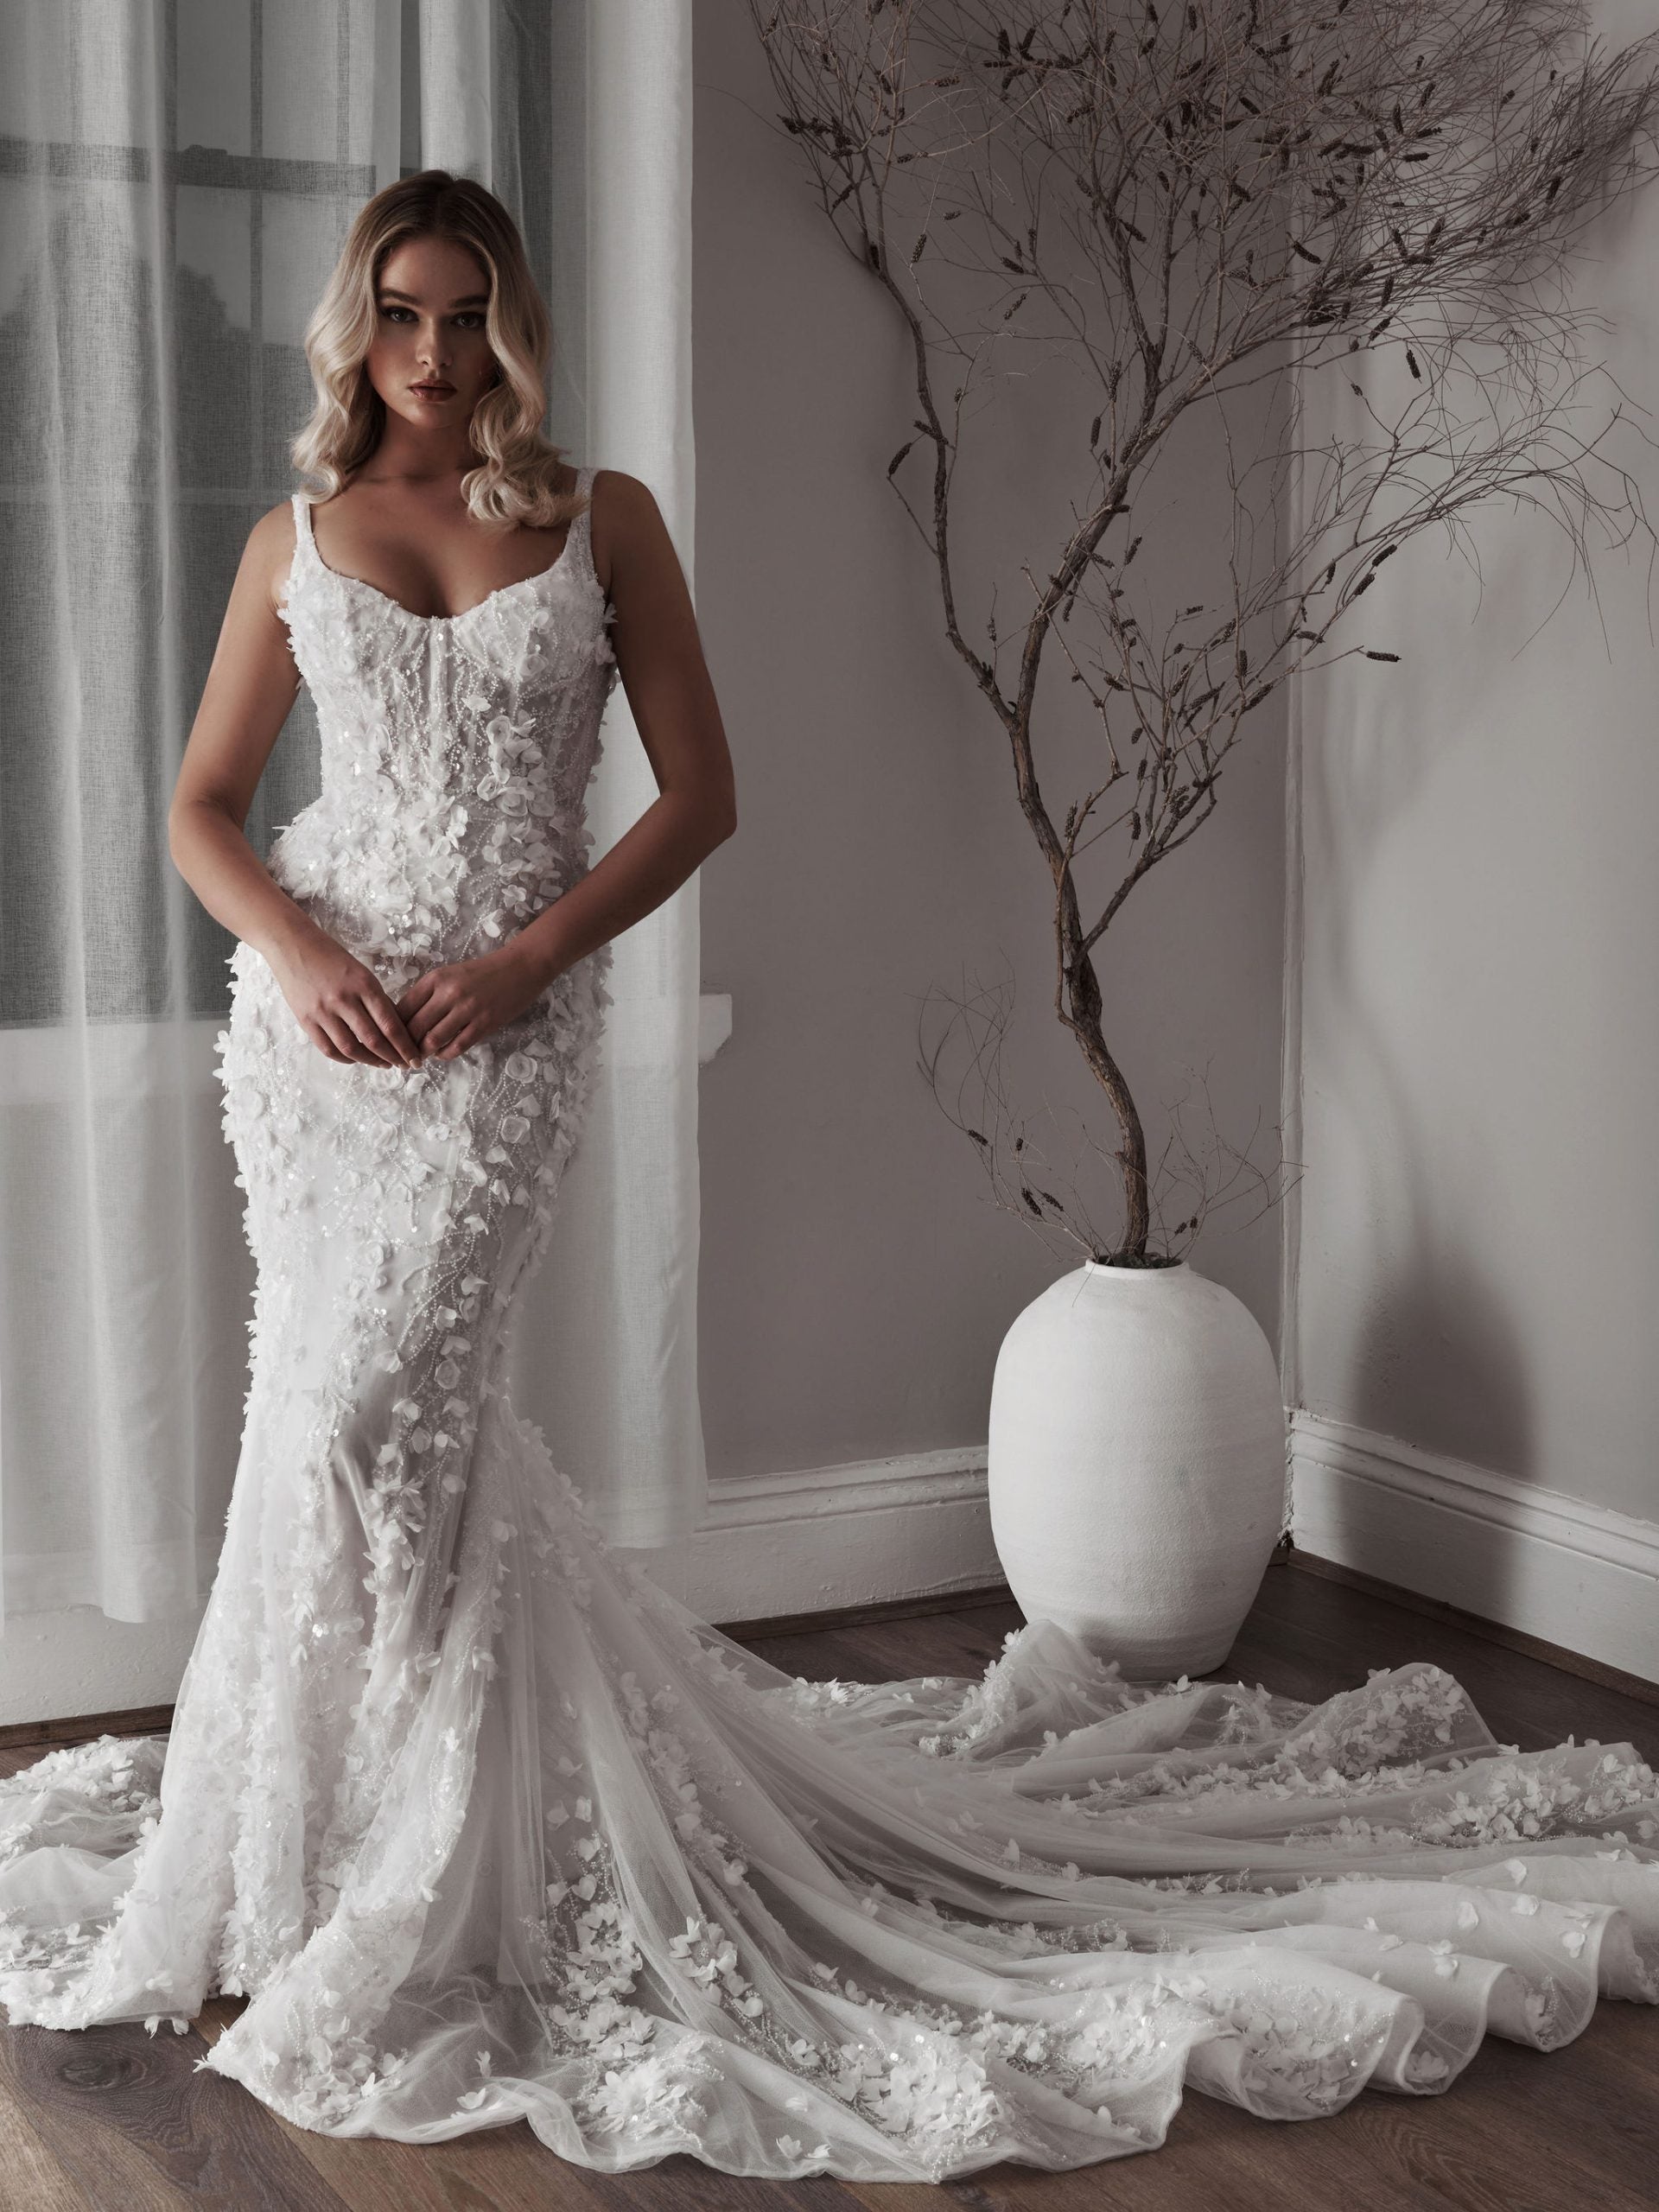 Beaded Floral Fit-and-Flare Gown With Overskirt by Blanche Bridal - Image 1